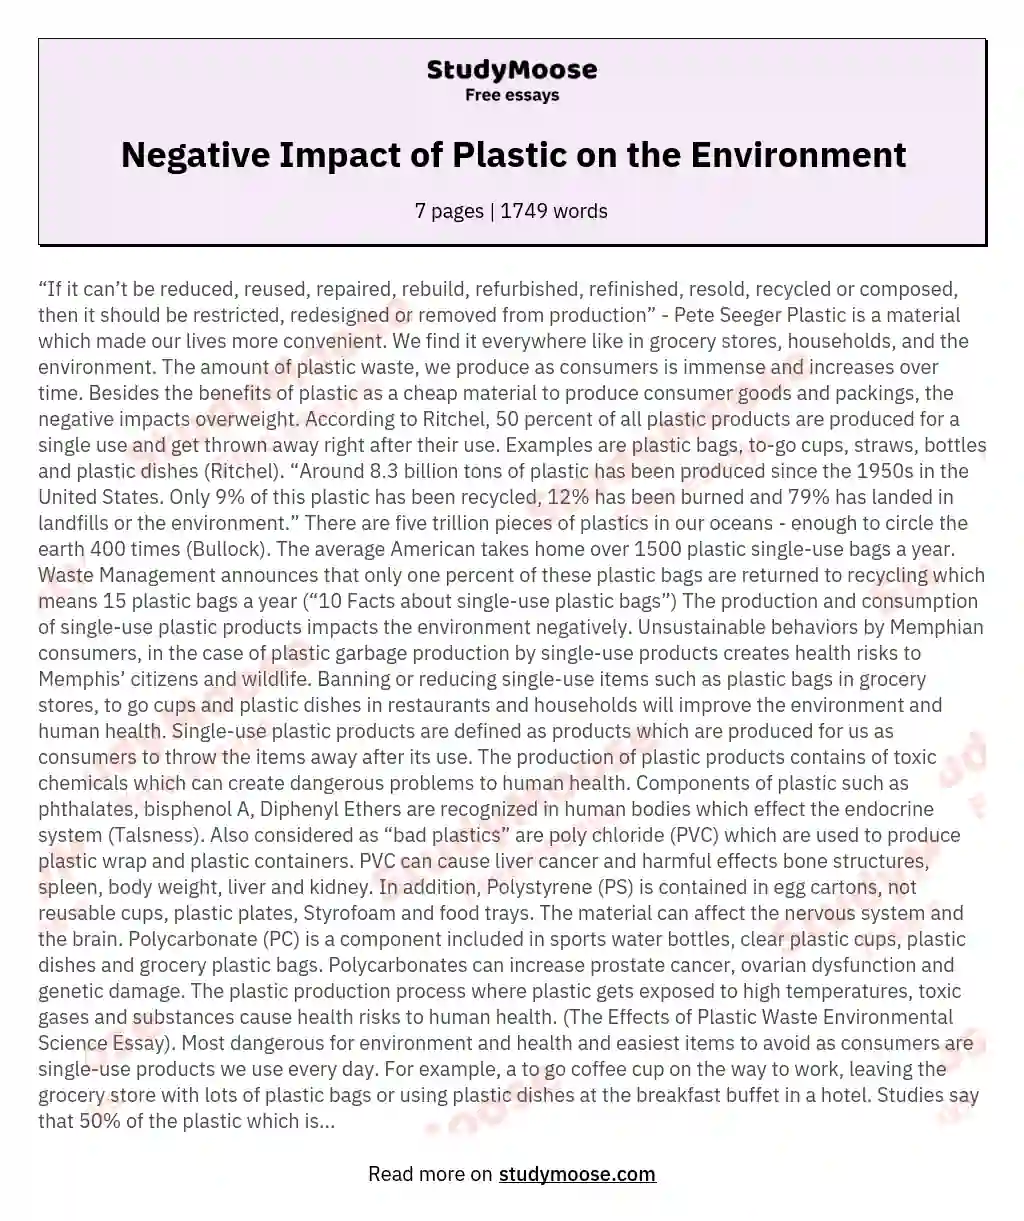 Negative Impact of Plastic on the Environment essay